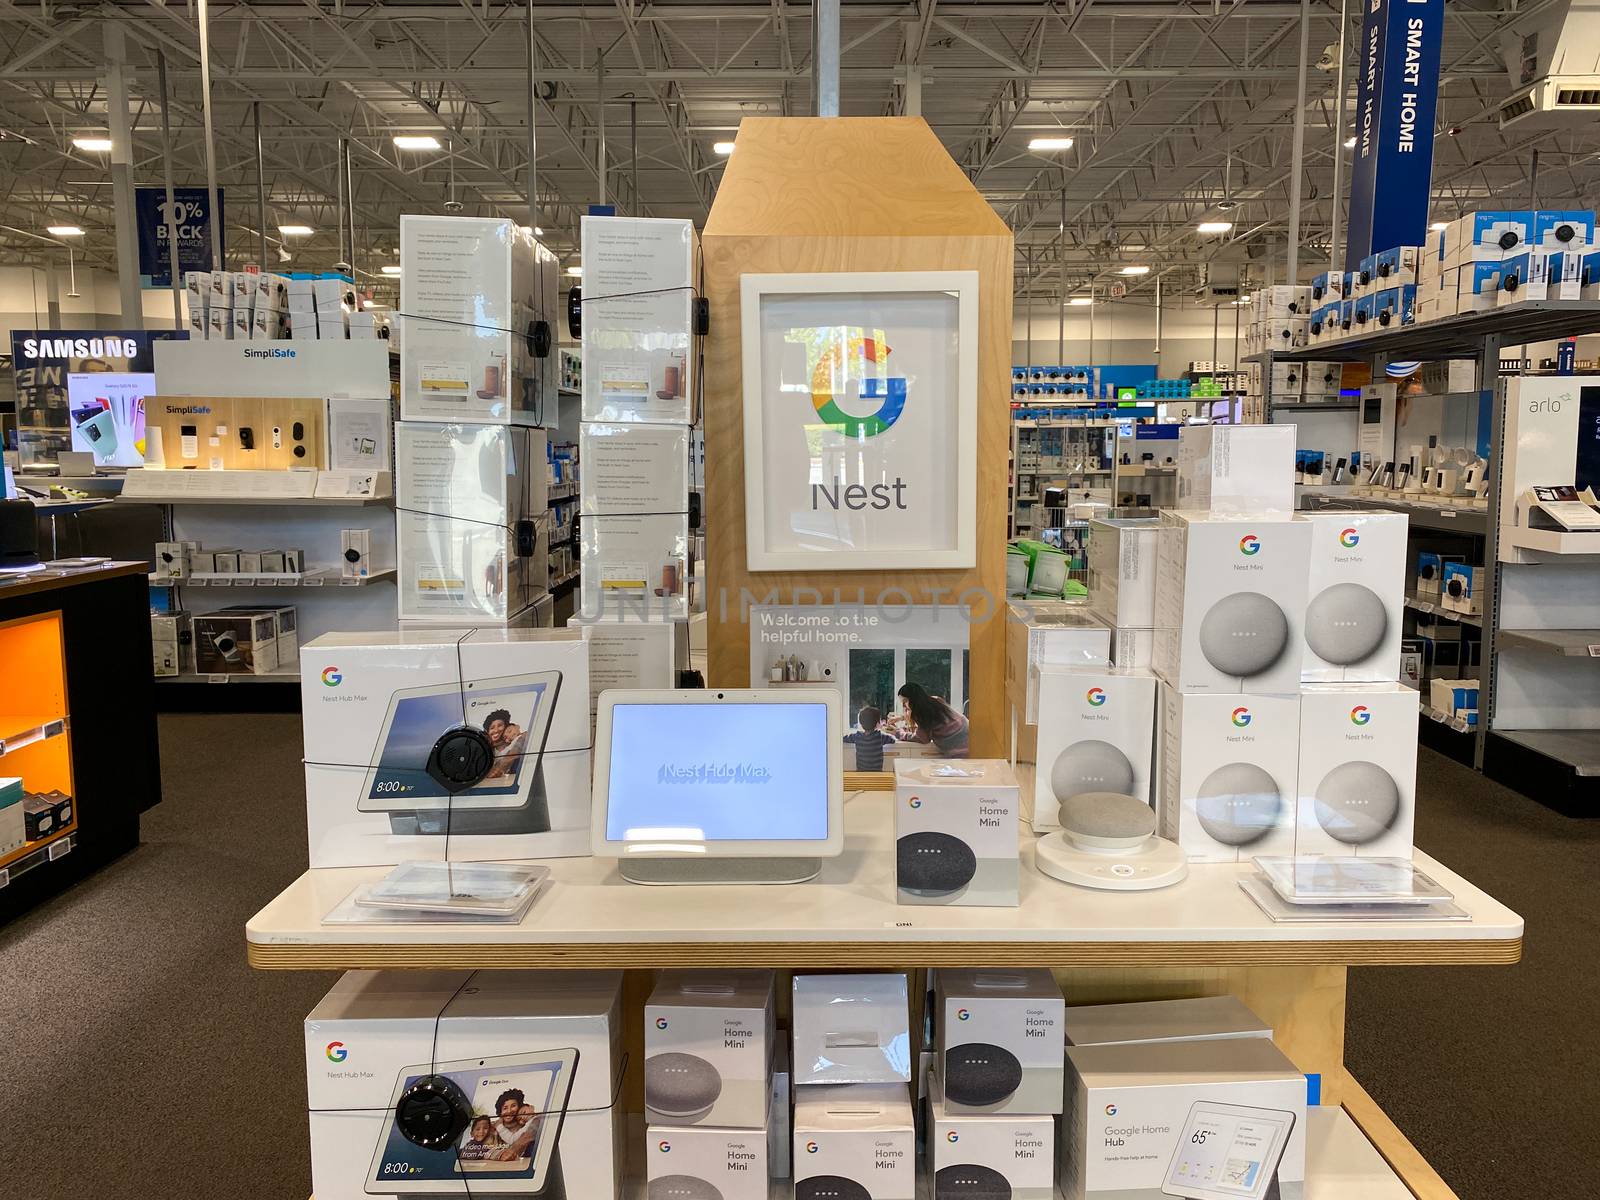 The Google Nest Home device display at Best Buy in Orlando, Flor by Jshanebutt